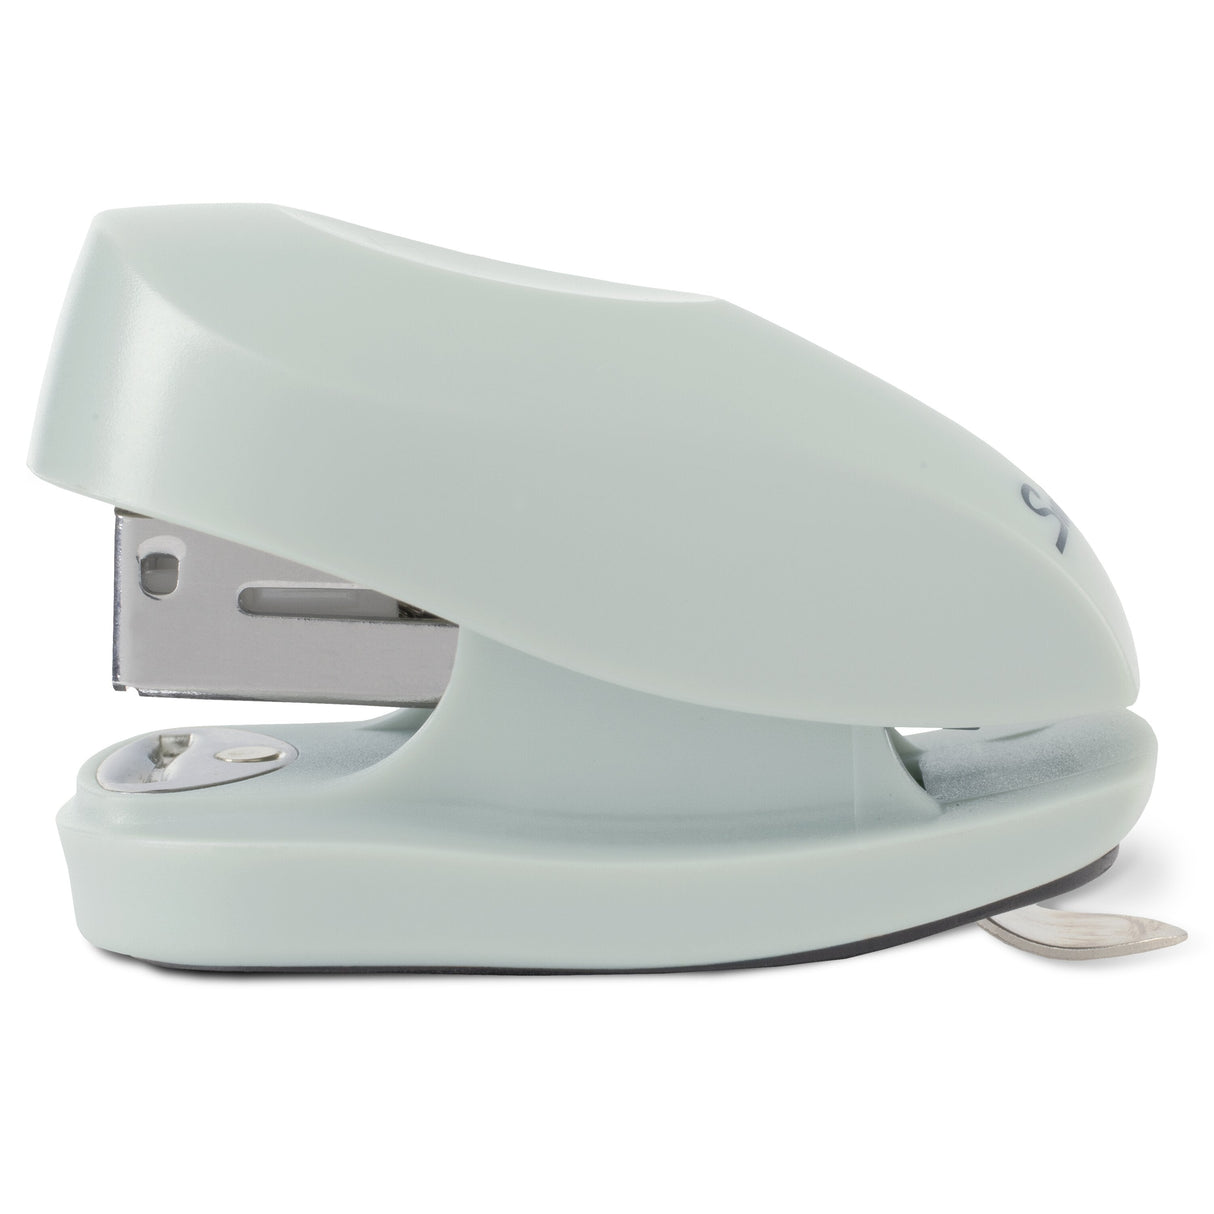 Swingline Tot Stapler with Built-in Staple Remover, 12 Sheets, Color Chosen For You